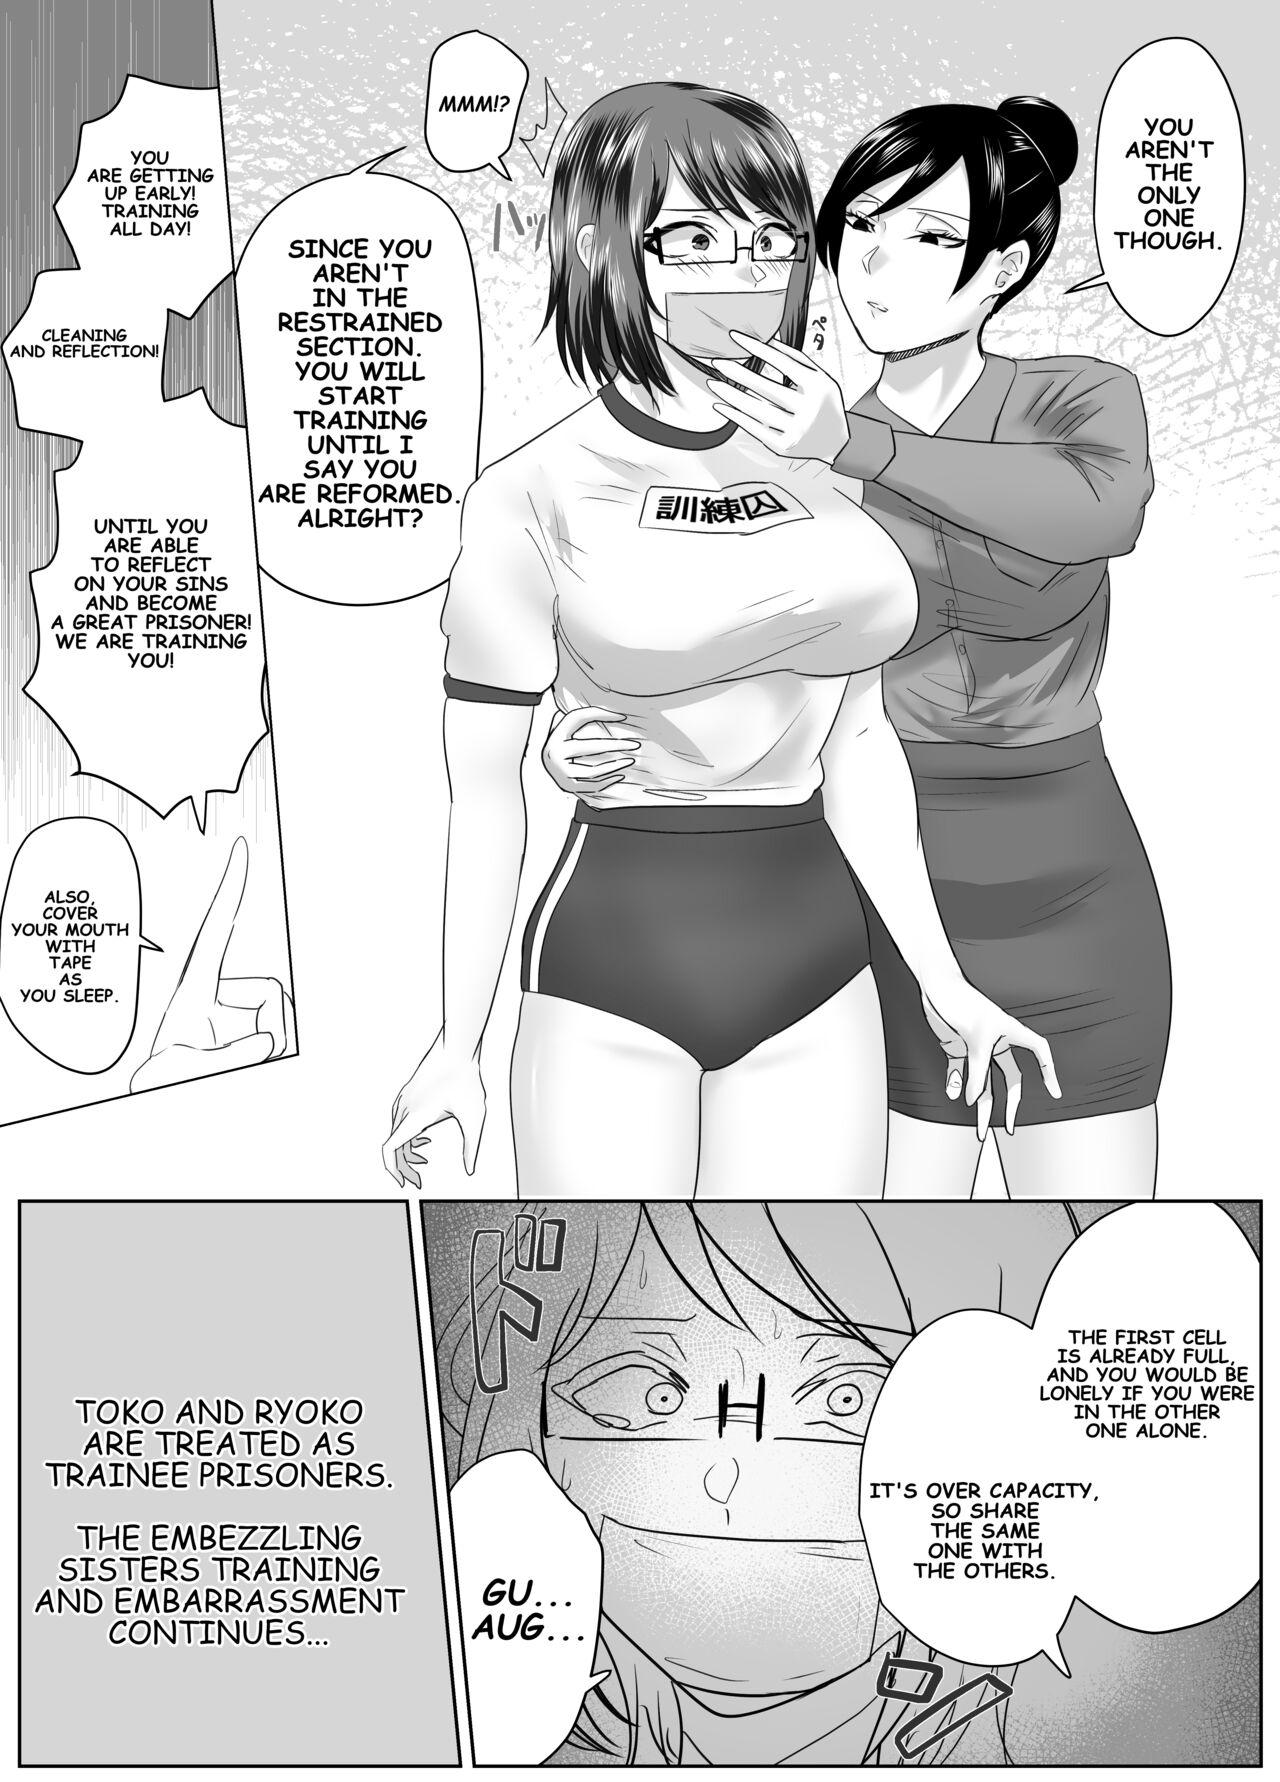 Hot Couple Sex A tale of reflection 2 Training prisoners! - Original Russia - Page 23